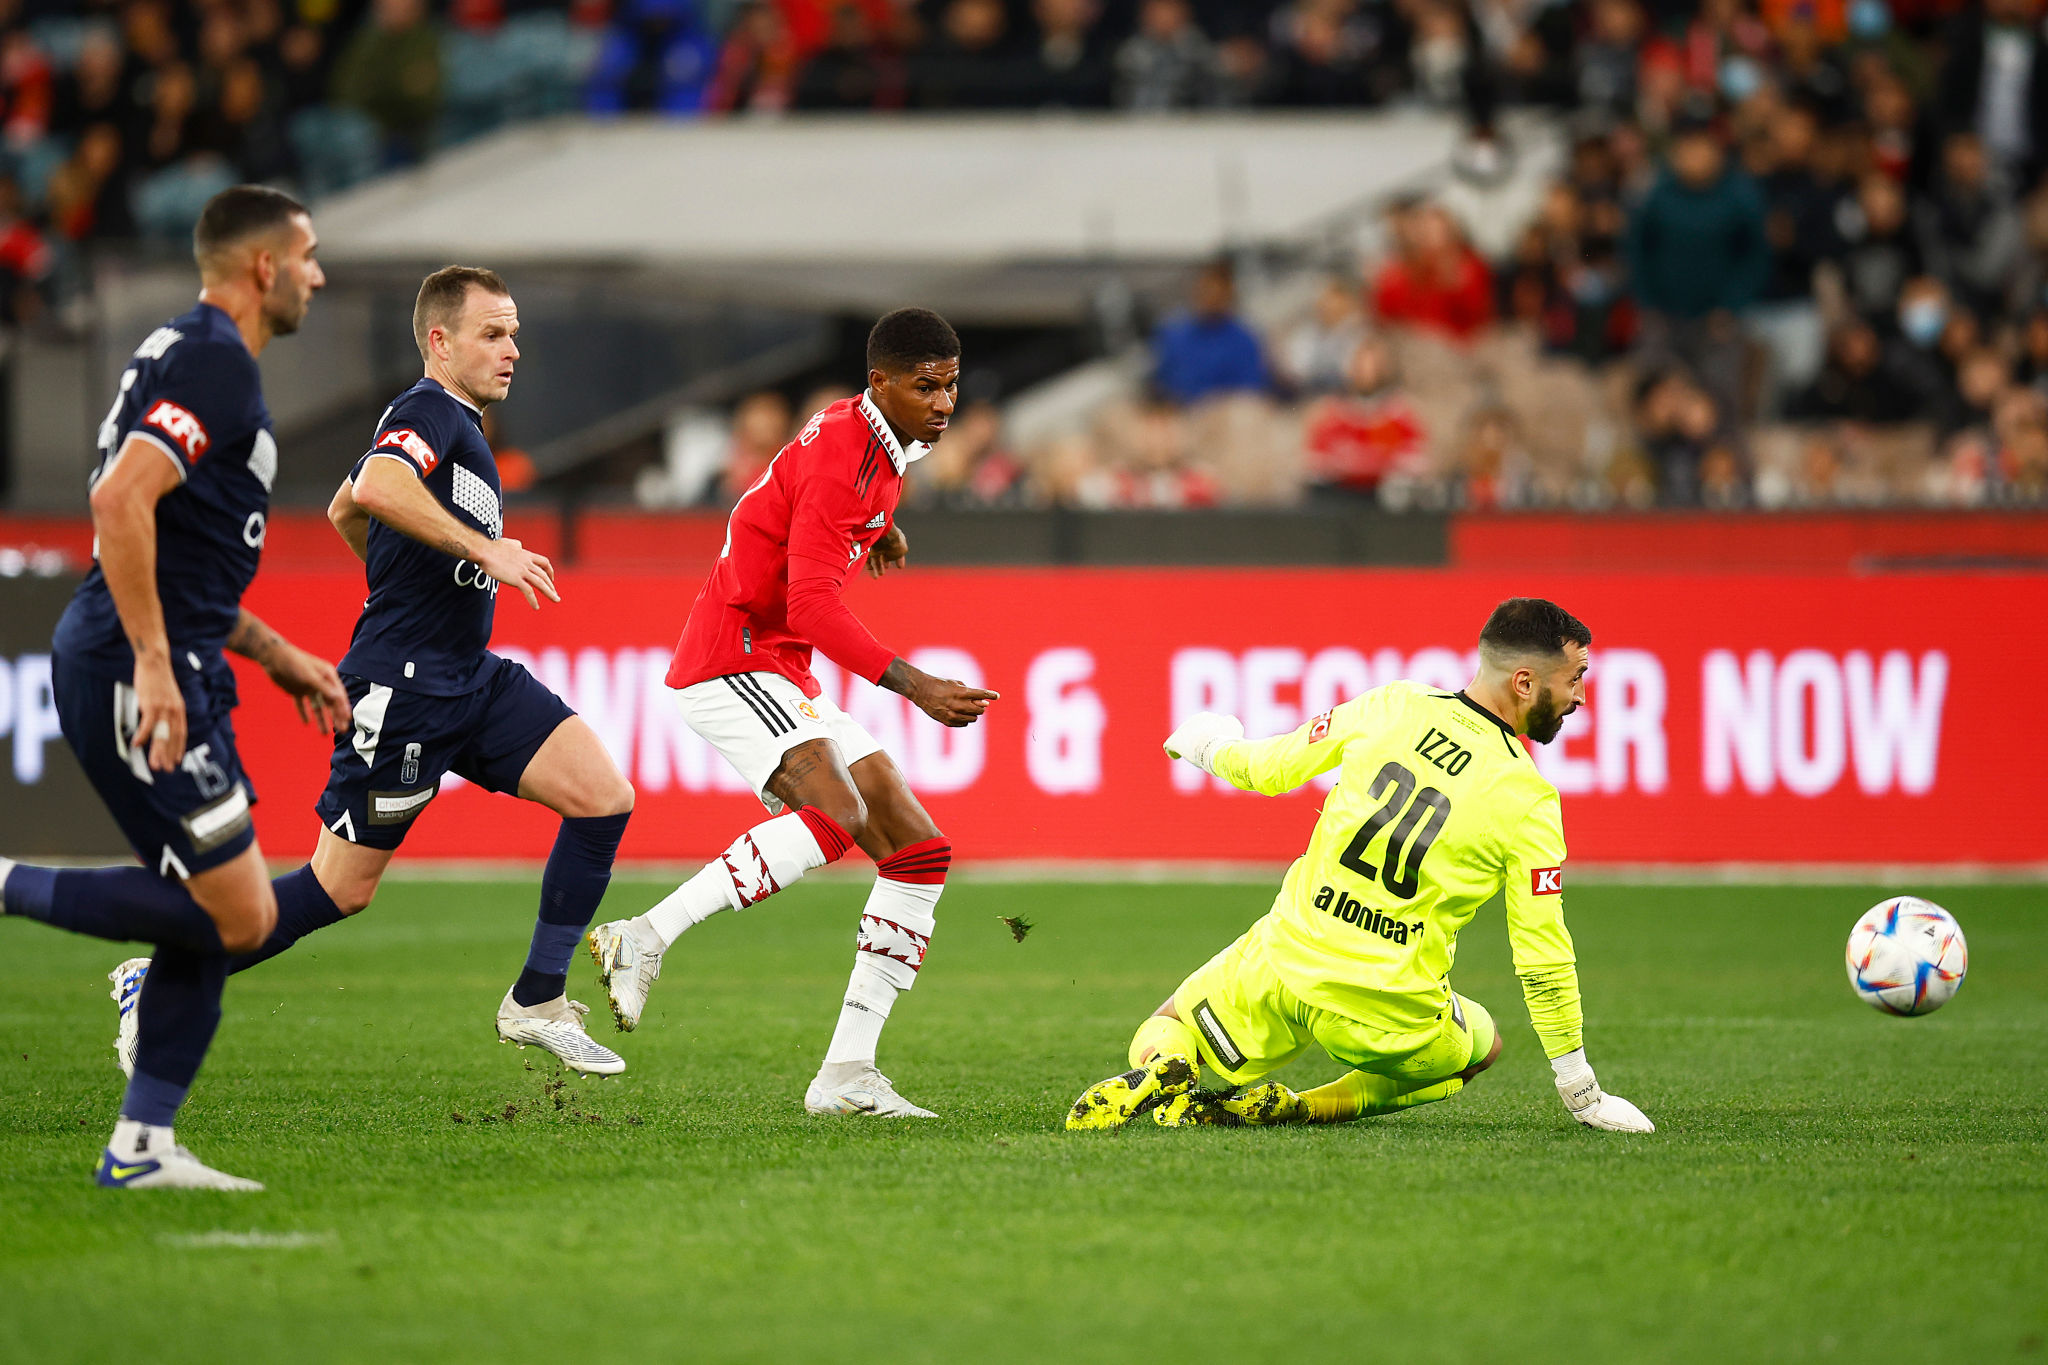 Melbourne Victory vs Man United: United wins 4-1: Goals from Martial, McTominay and Rashford seals second Pre-Season victory for Erik ten Hag, Check Manchester United beat Melbourne Victory HIGHLIGHTS